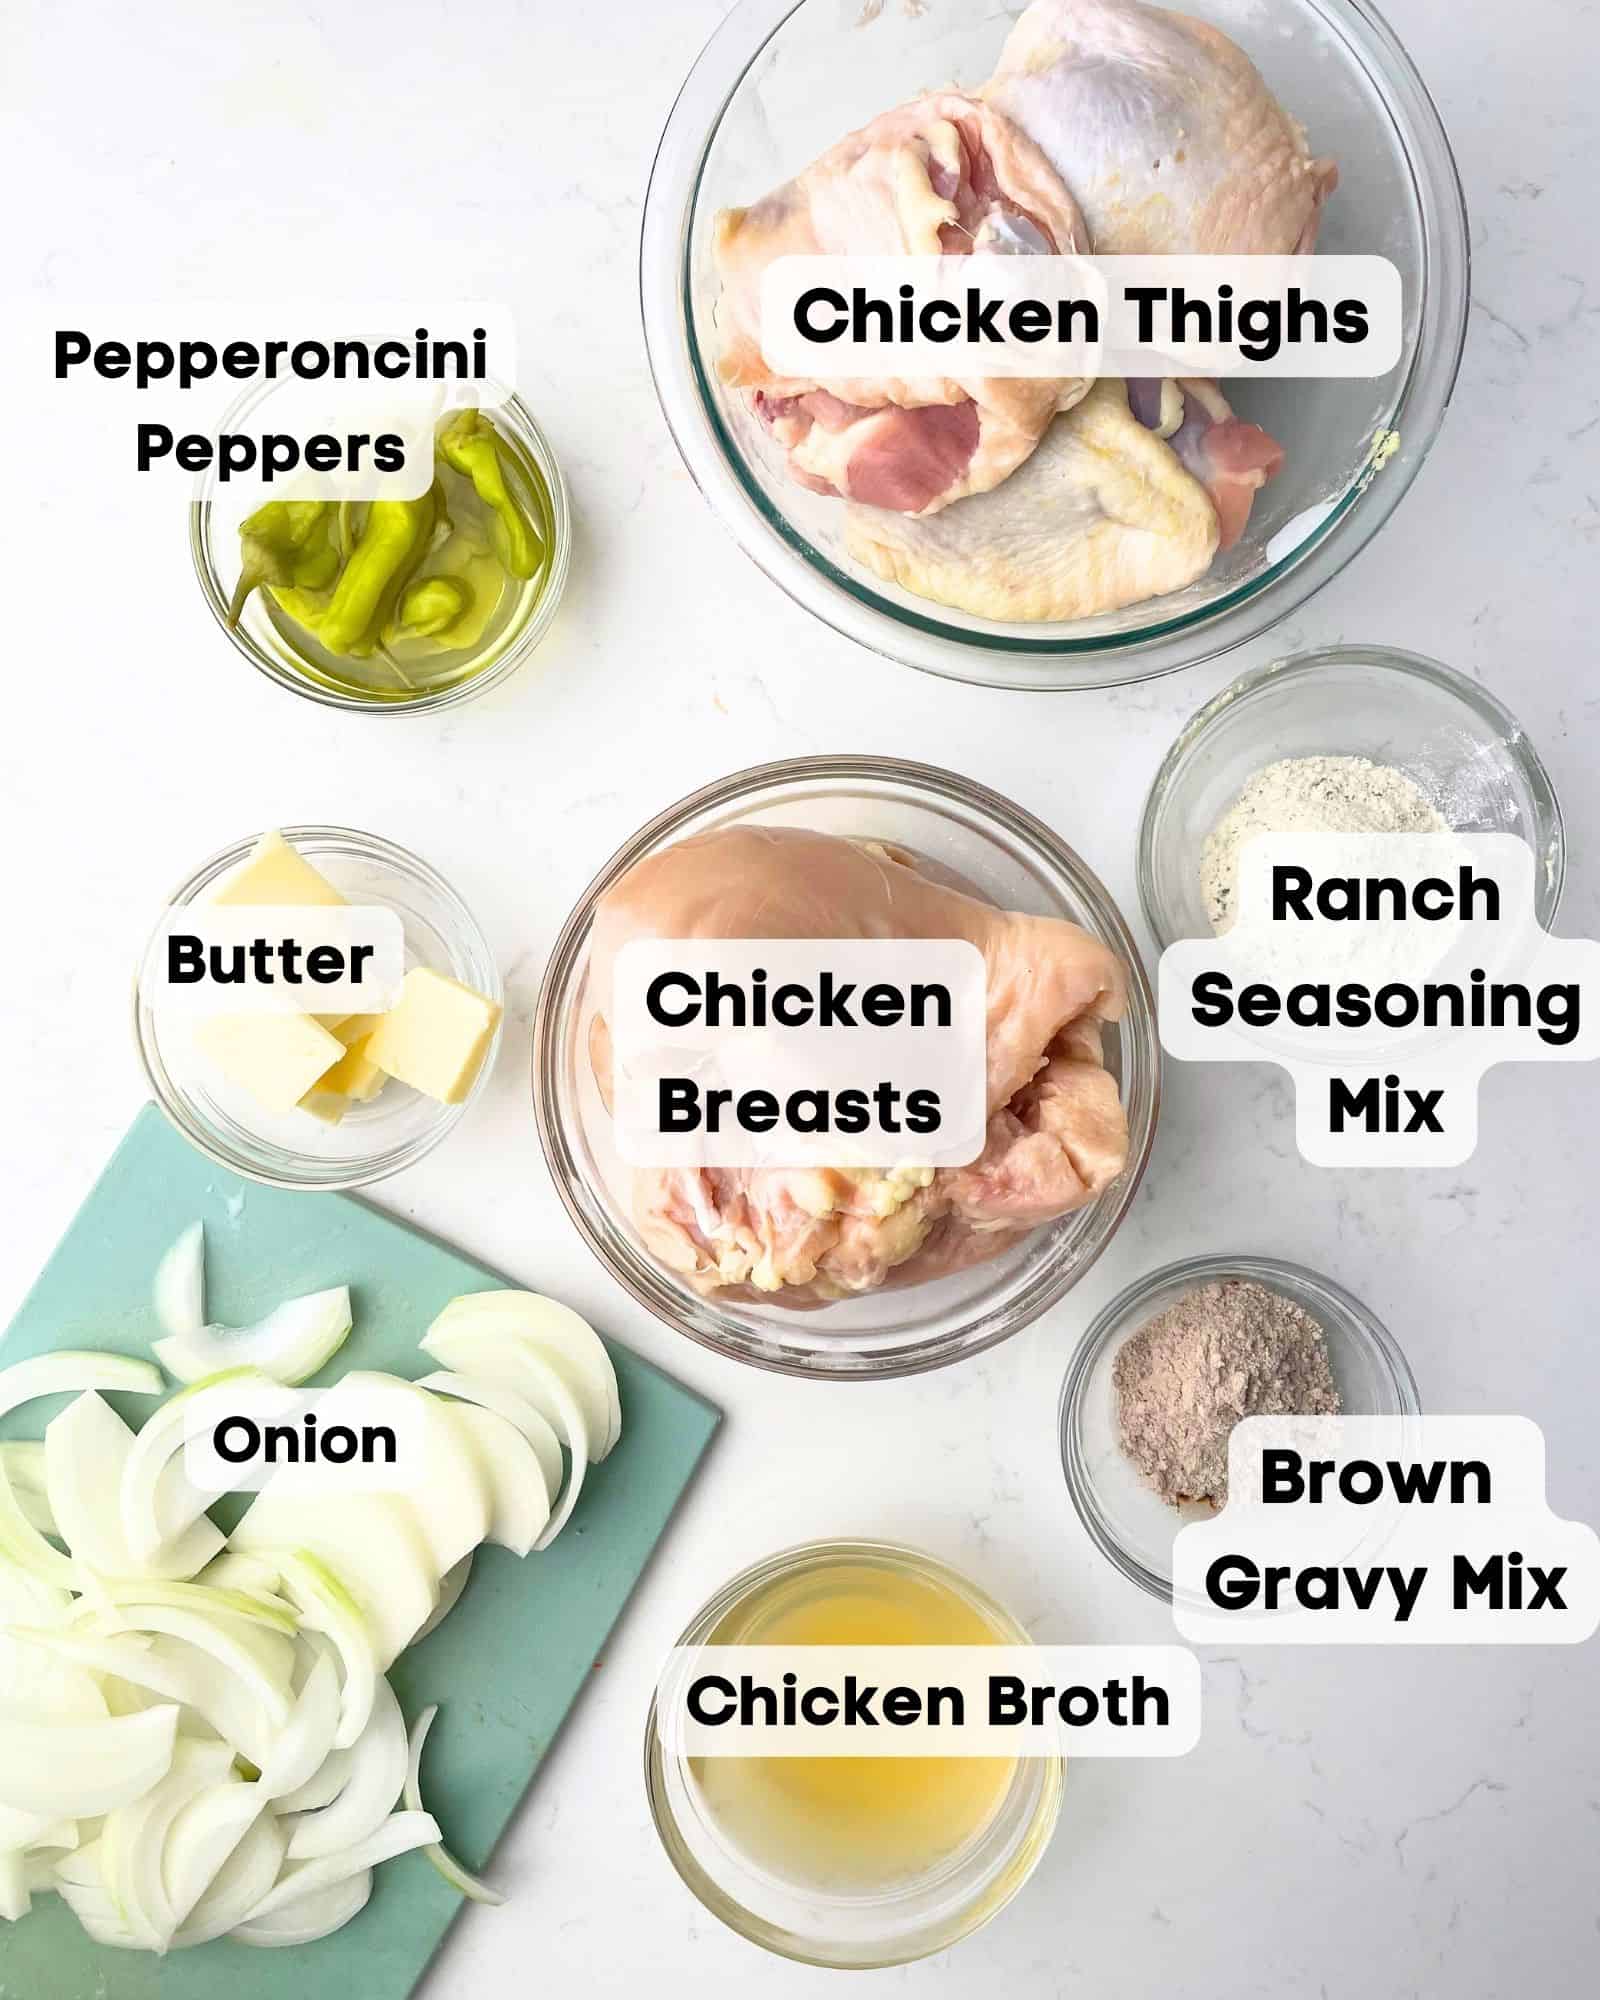 ingredients to make mississippi chicken - chicken, onions, pepperoncini peppers, pepperoncini juice, chicken broth, ranch seasoning mix, brown gravy mix, and butter.